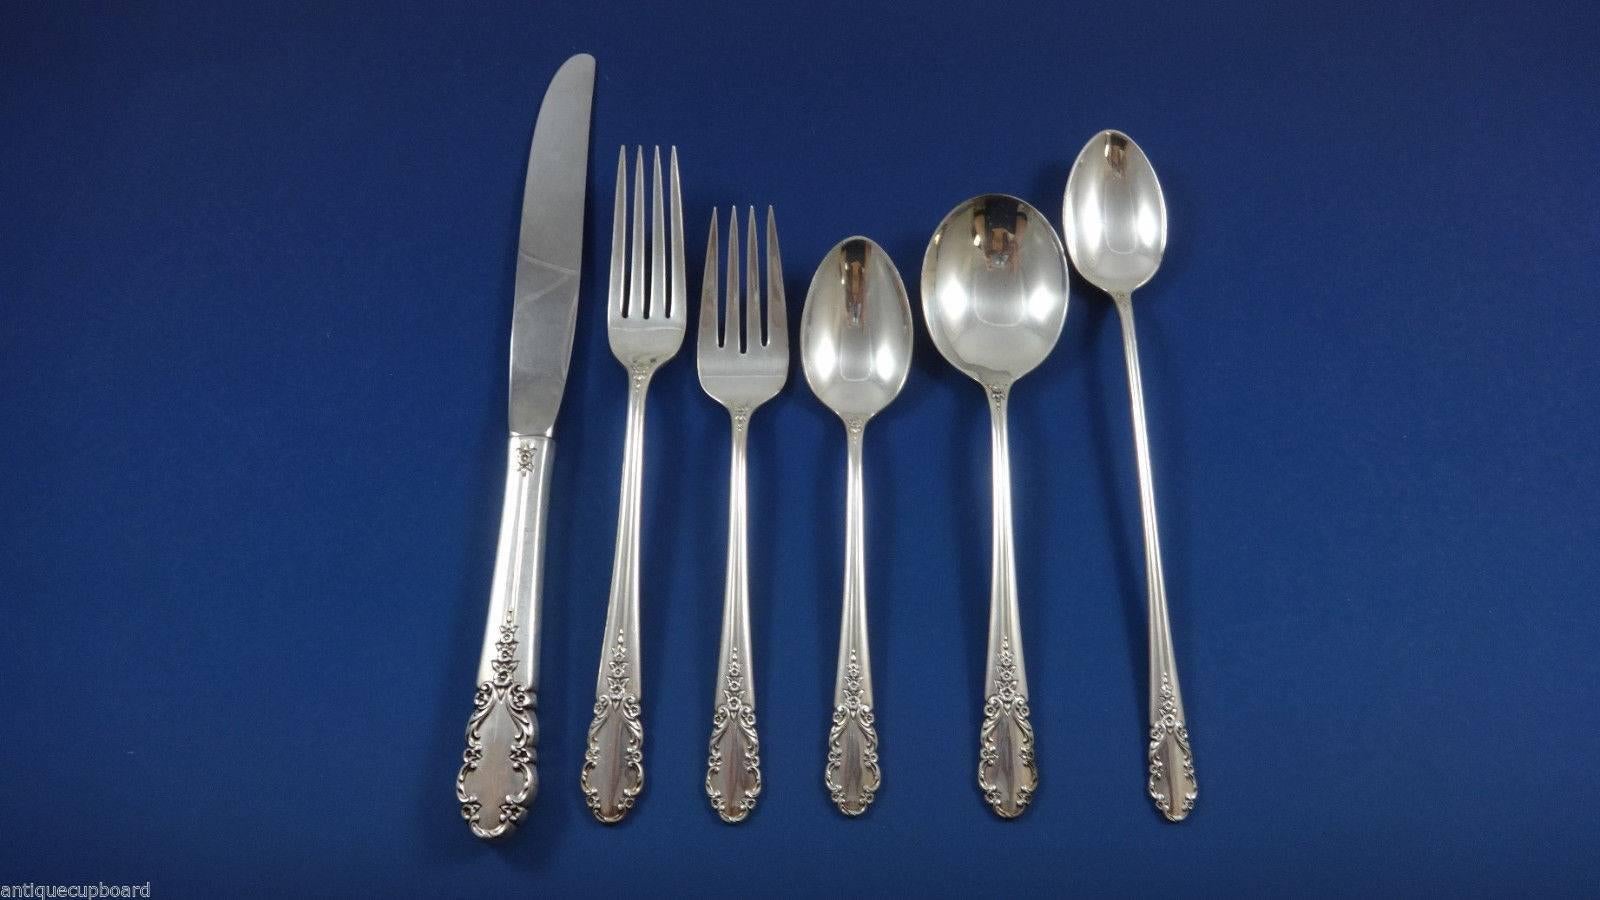 Lovely Bridal Veil by International sterling silver flatware set of 51 Pieces. This set includes:

Eight knives, 9